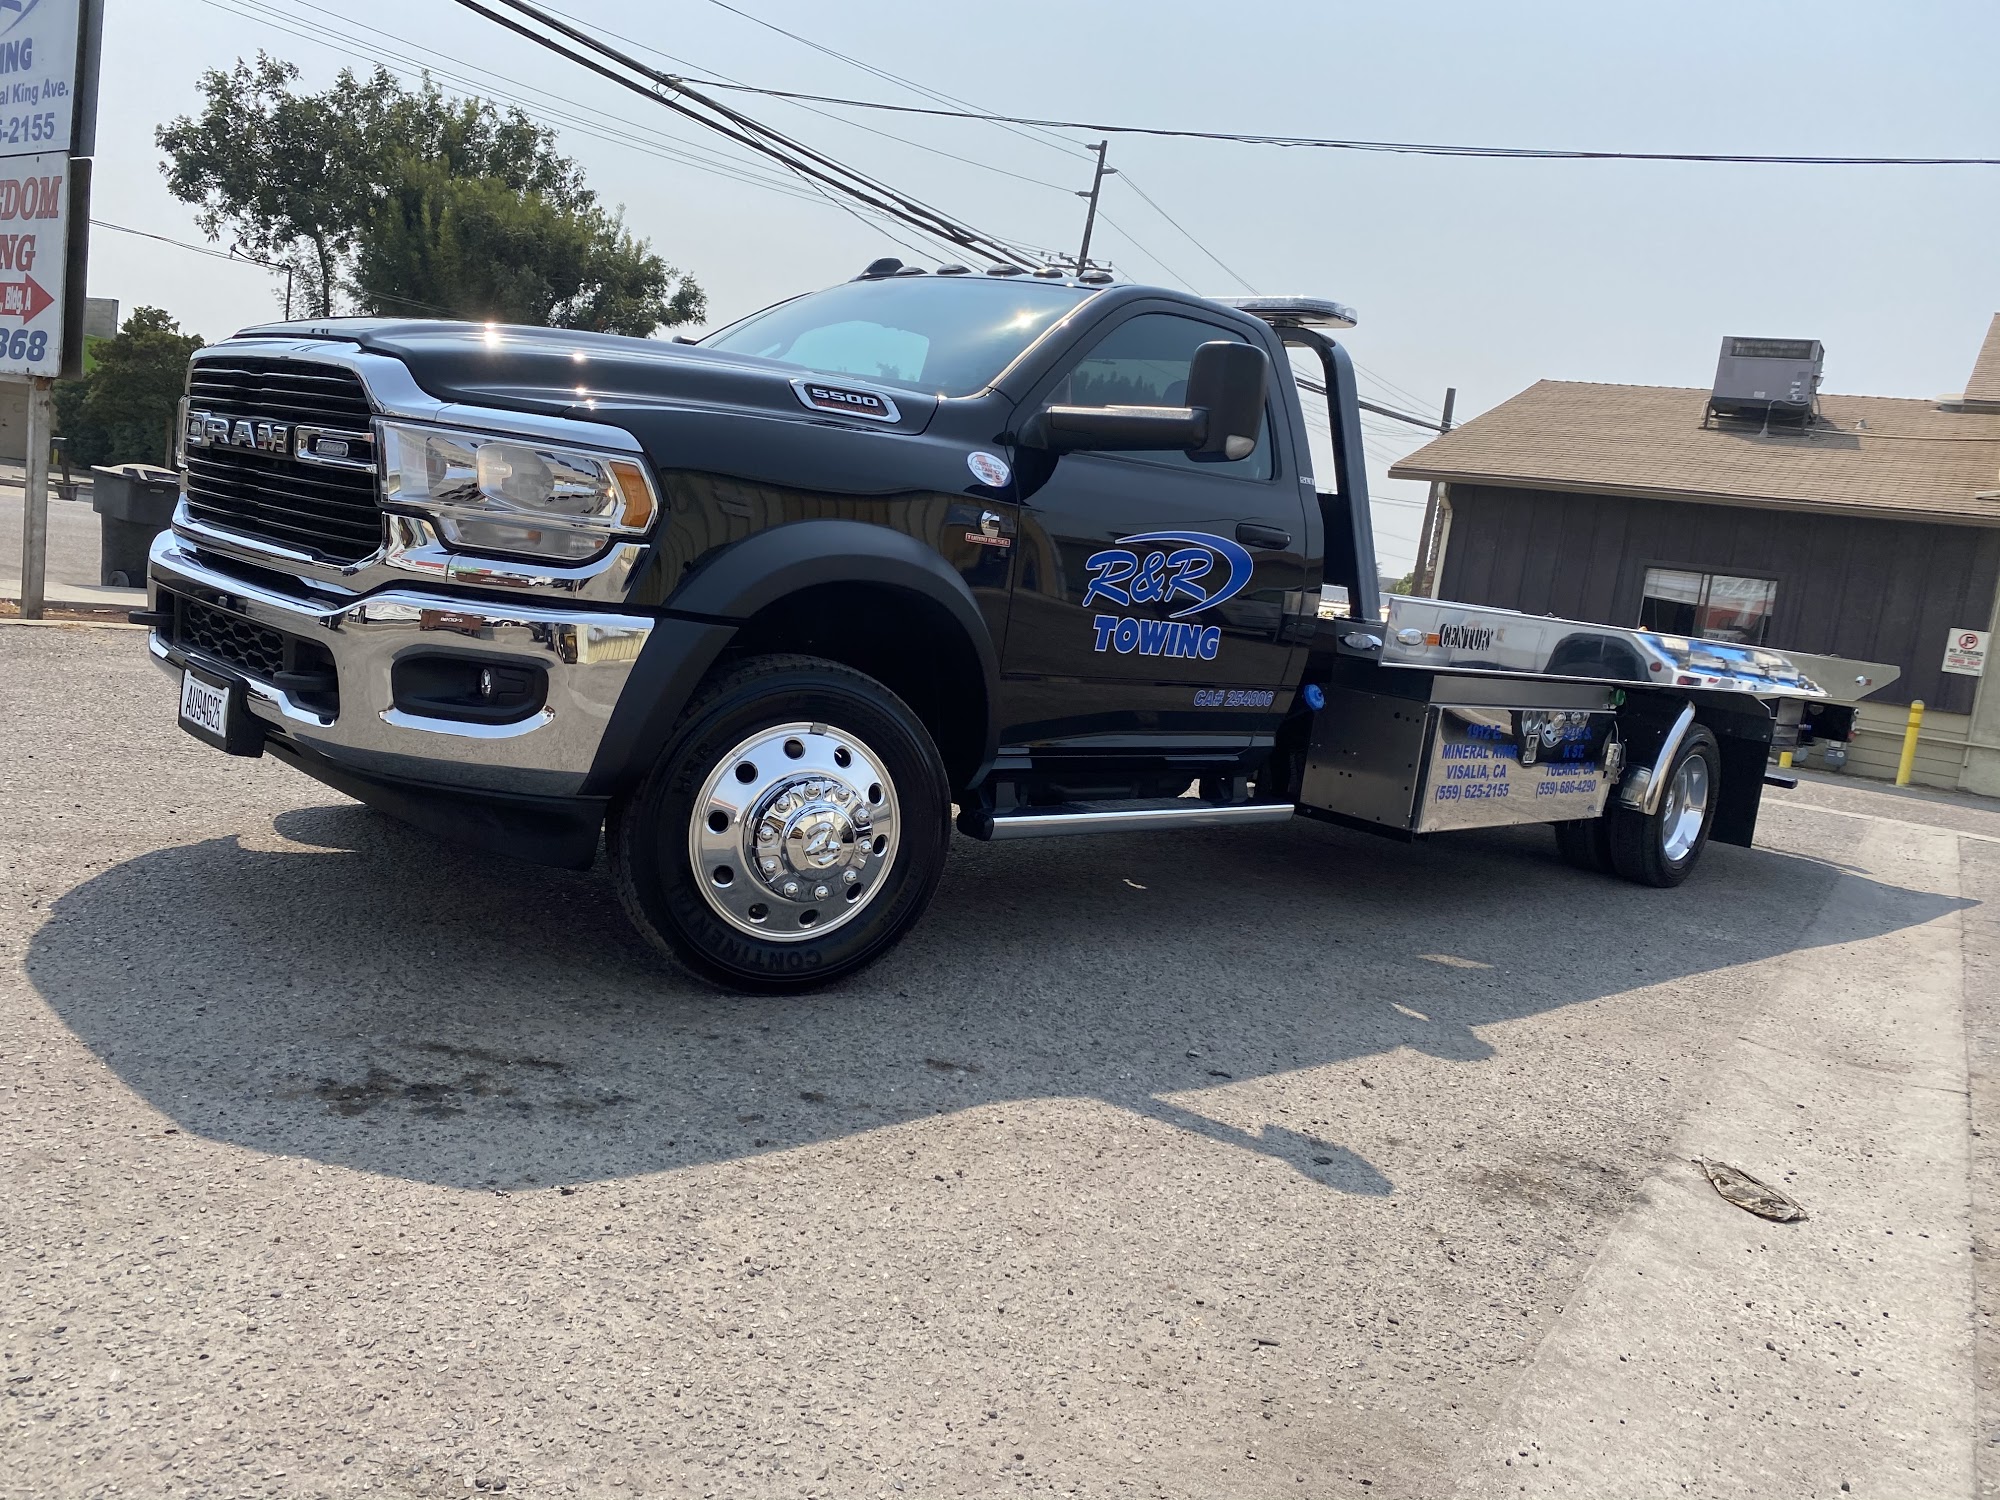 R&R Automotive and Towing